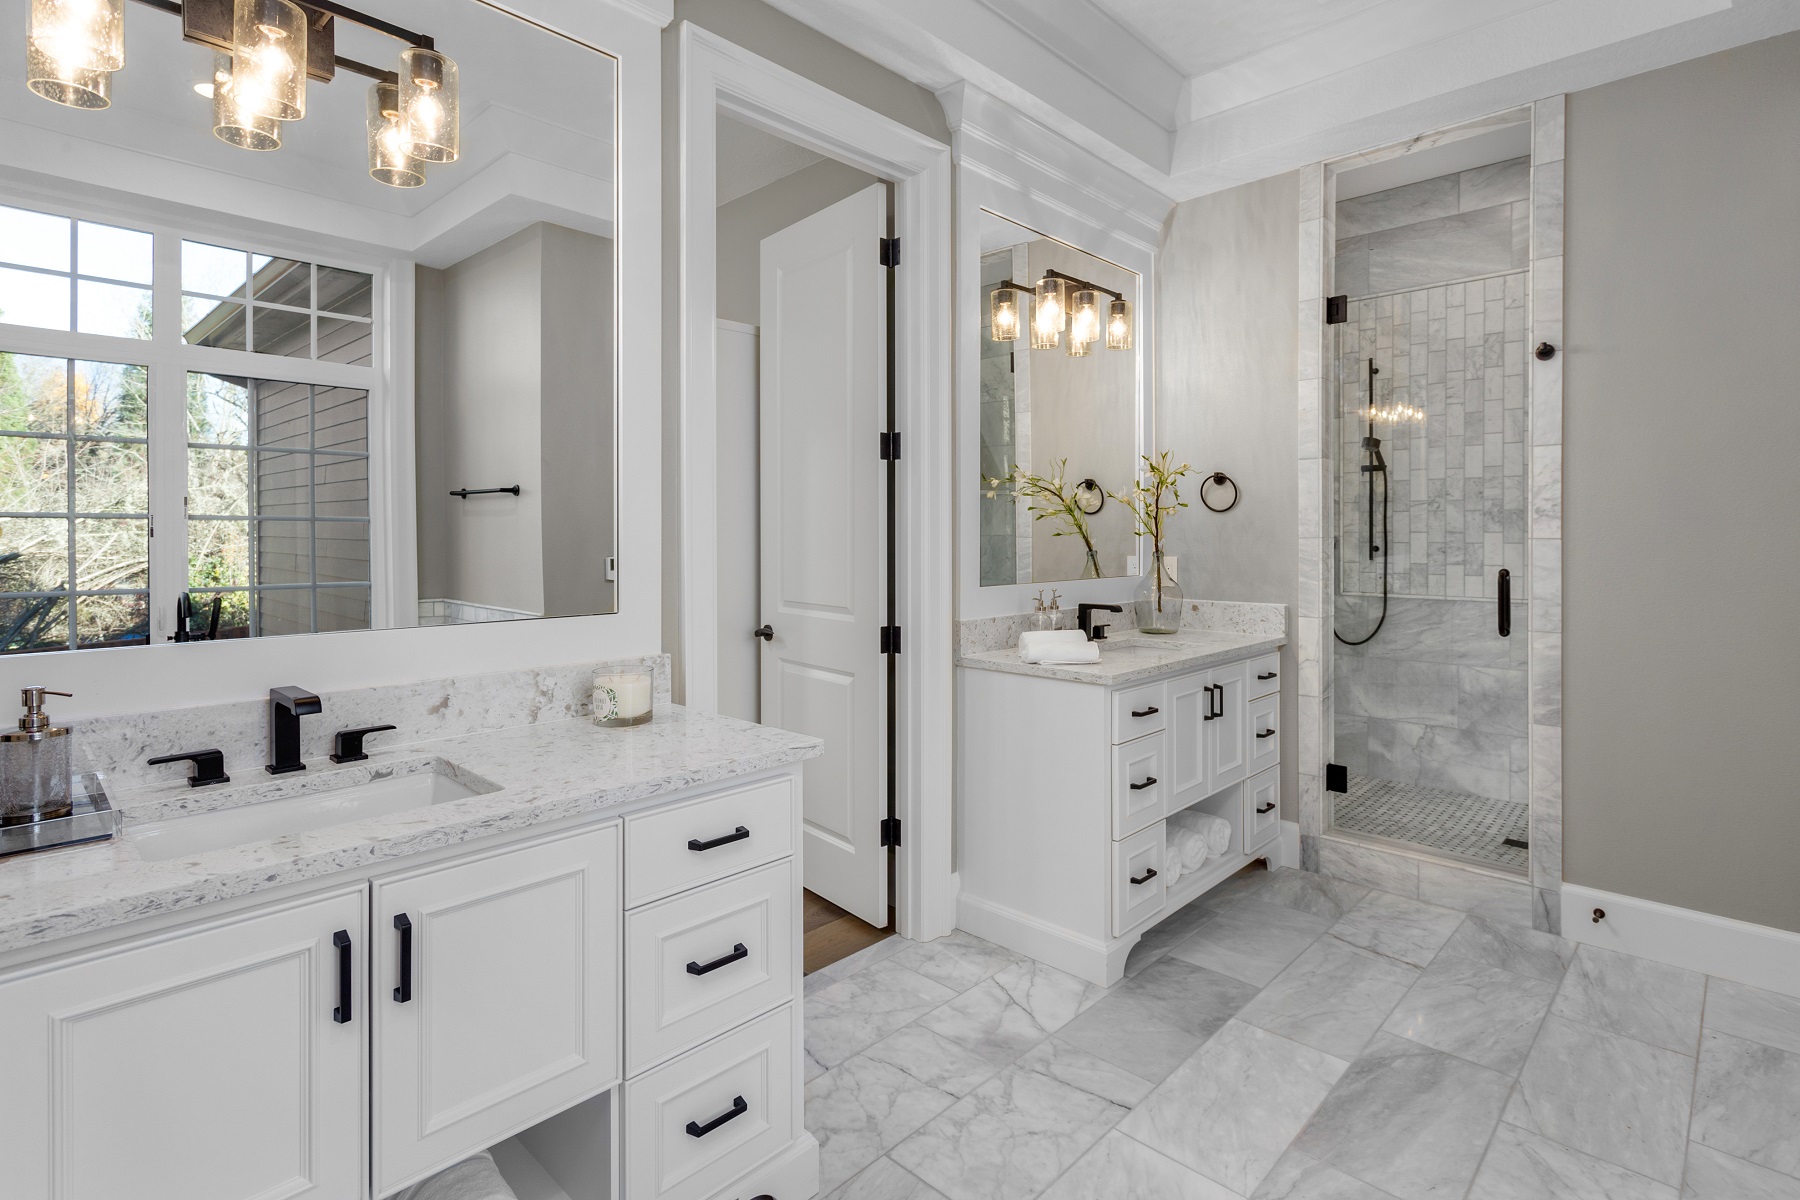 Save Money On Your Bathroom Remodel, How To Save Money Bathroom Renovation